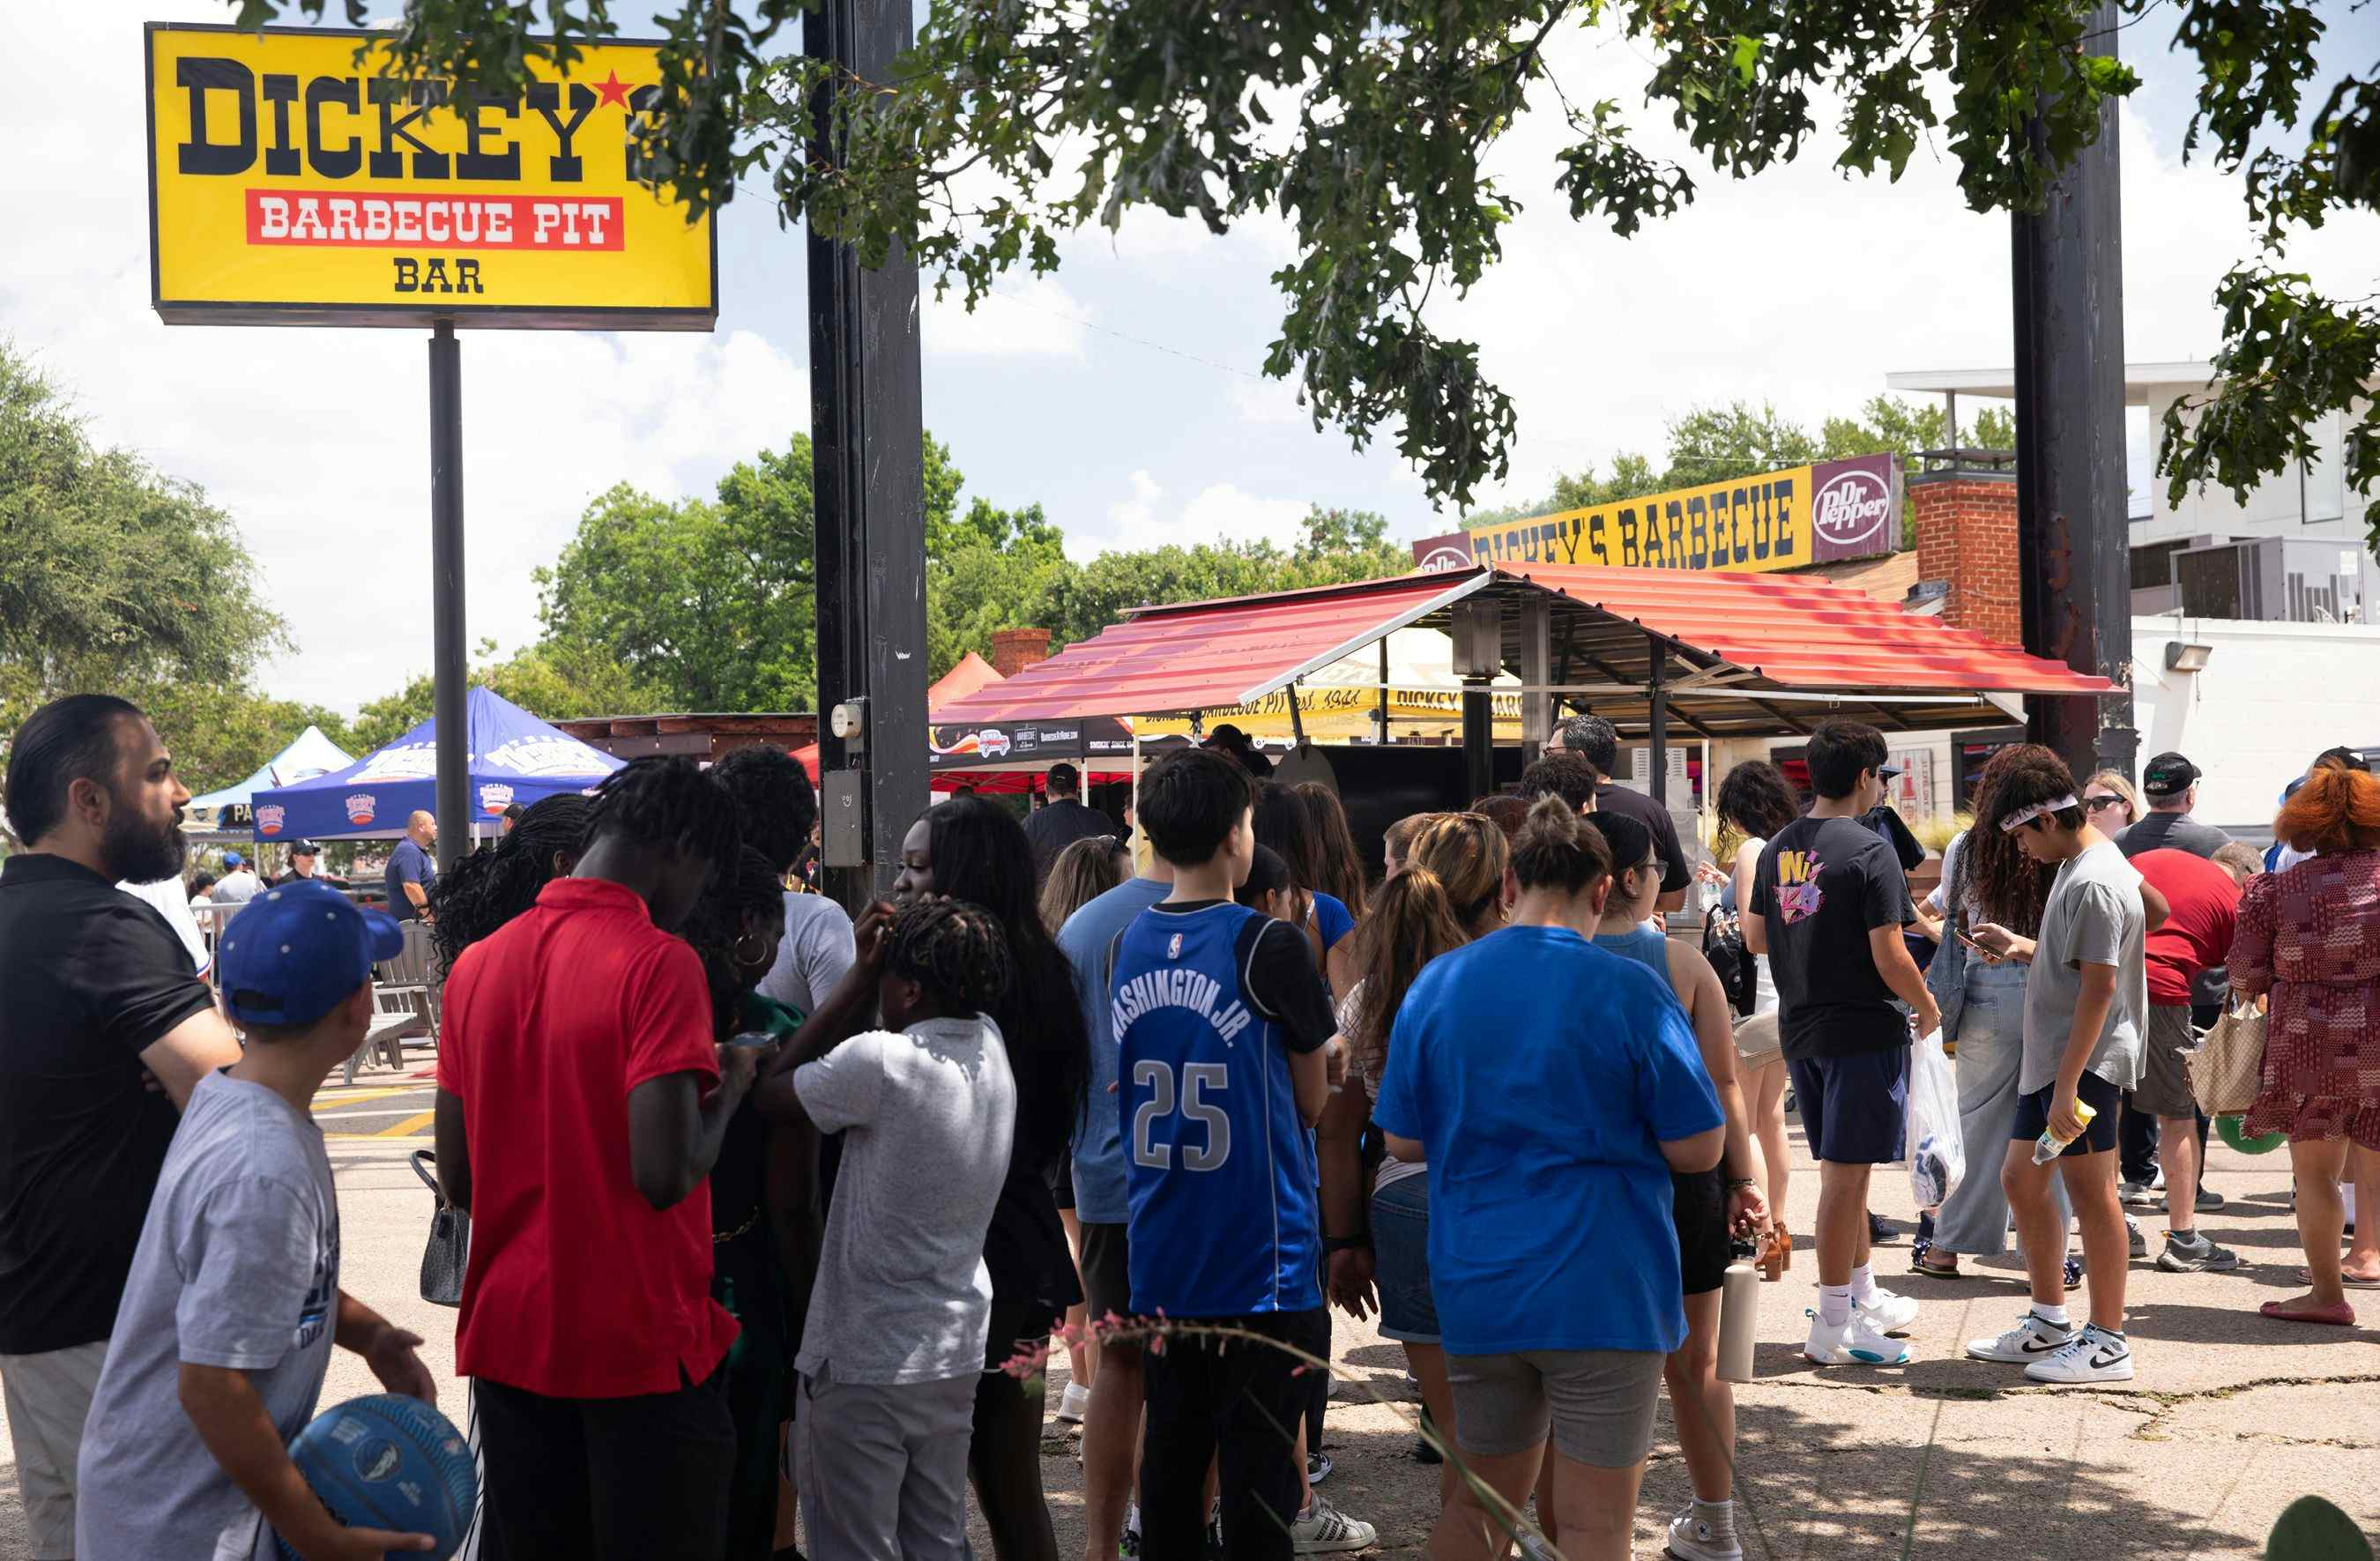 Dickey’s Barbecue and PJ Washington Teamed Up for Winning Event